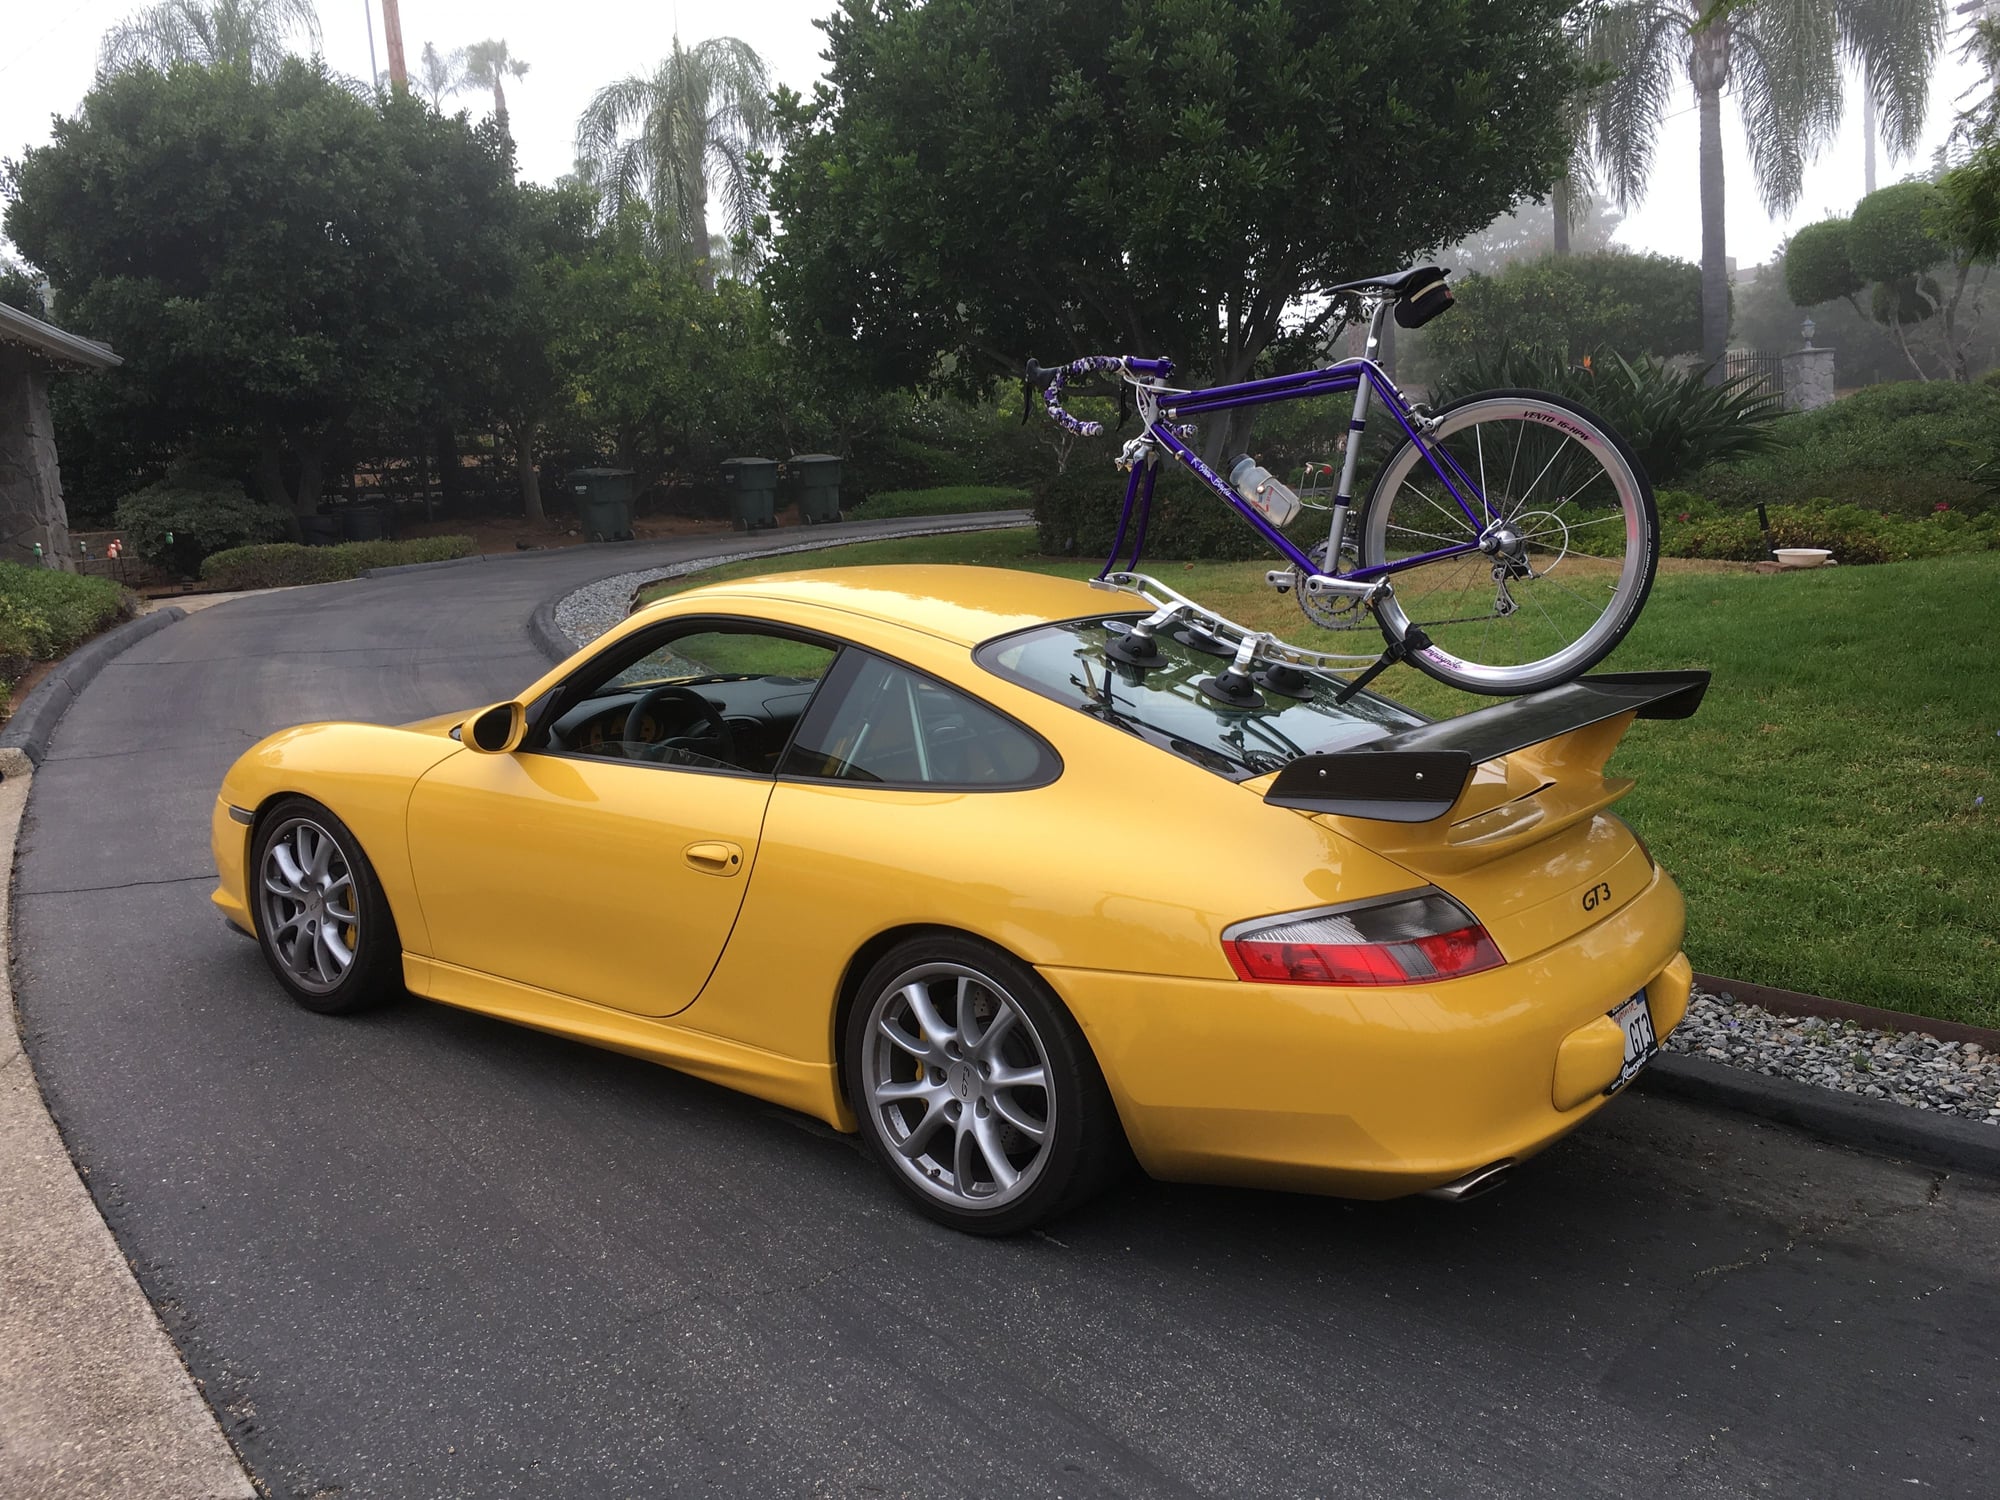 2000 - 2011 Porsche 911 - Show me your Speed Yellow cars for sale. - Used - Vista, CA 92084, United States